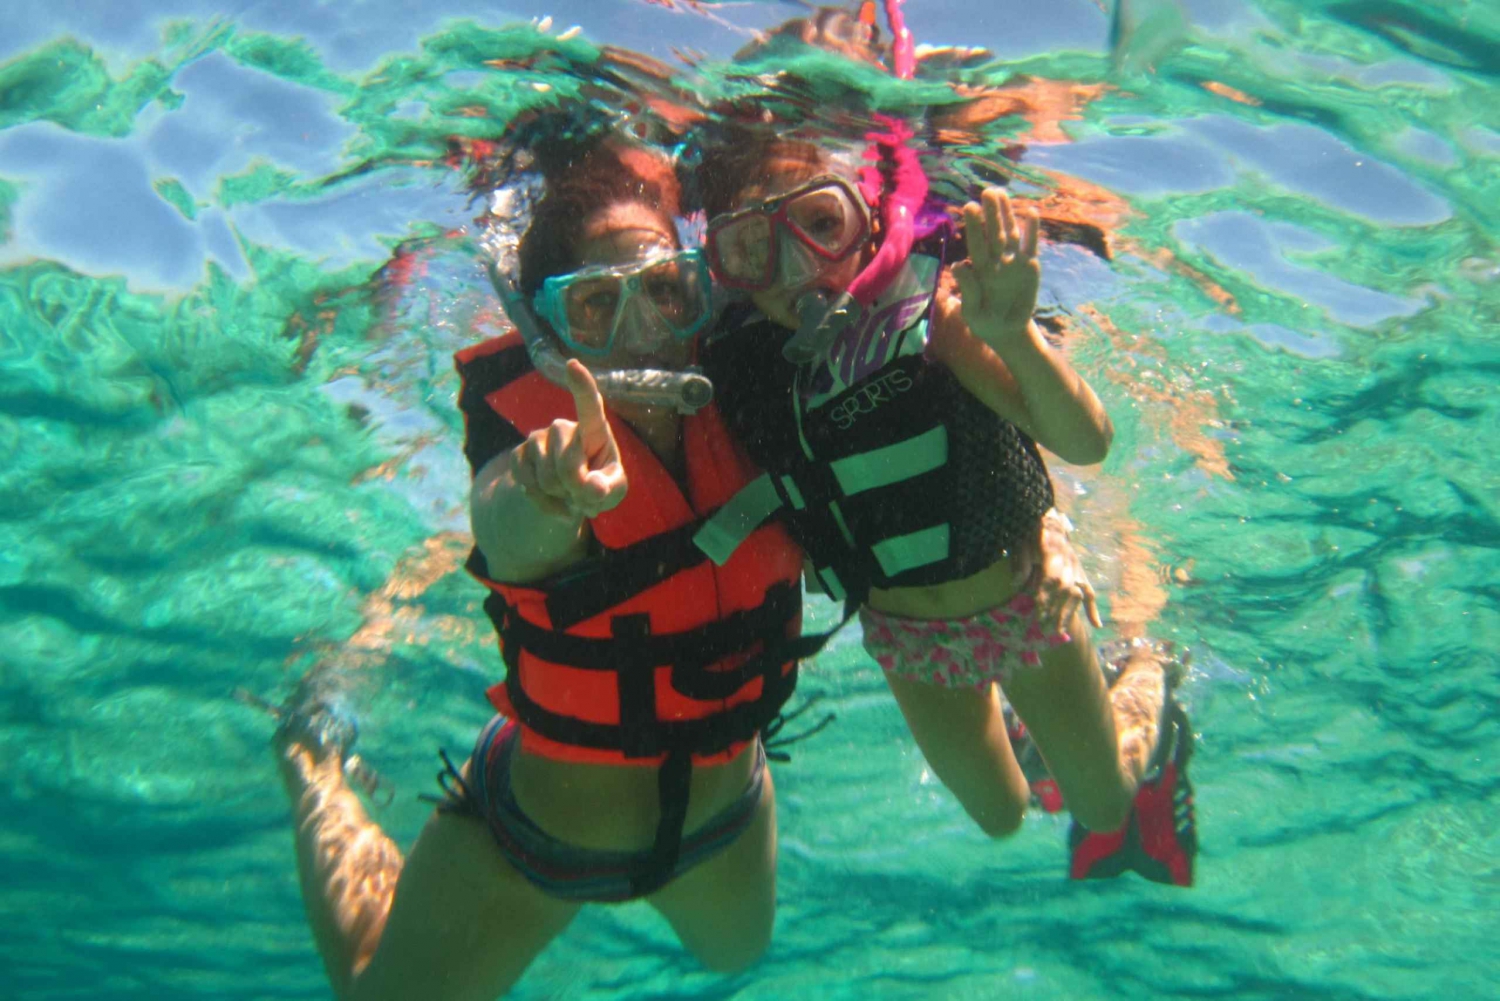 Cozumel: All Inclusive Beach Adventure with Snorkeling